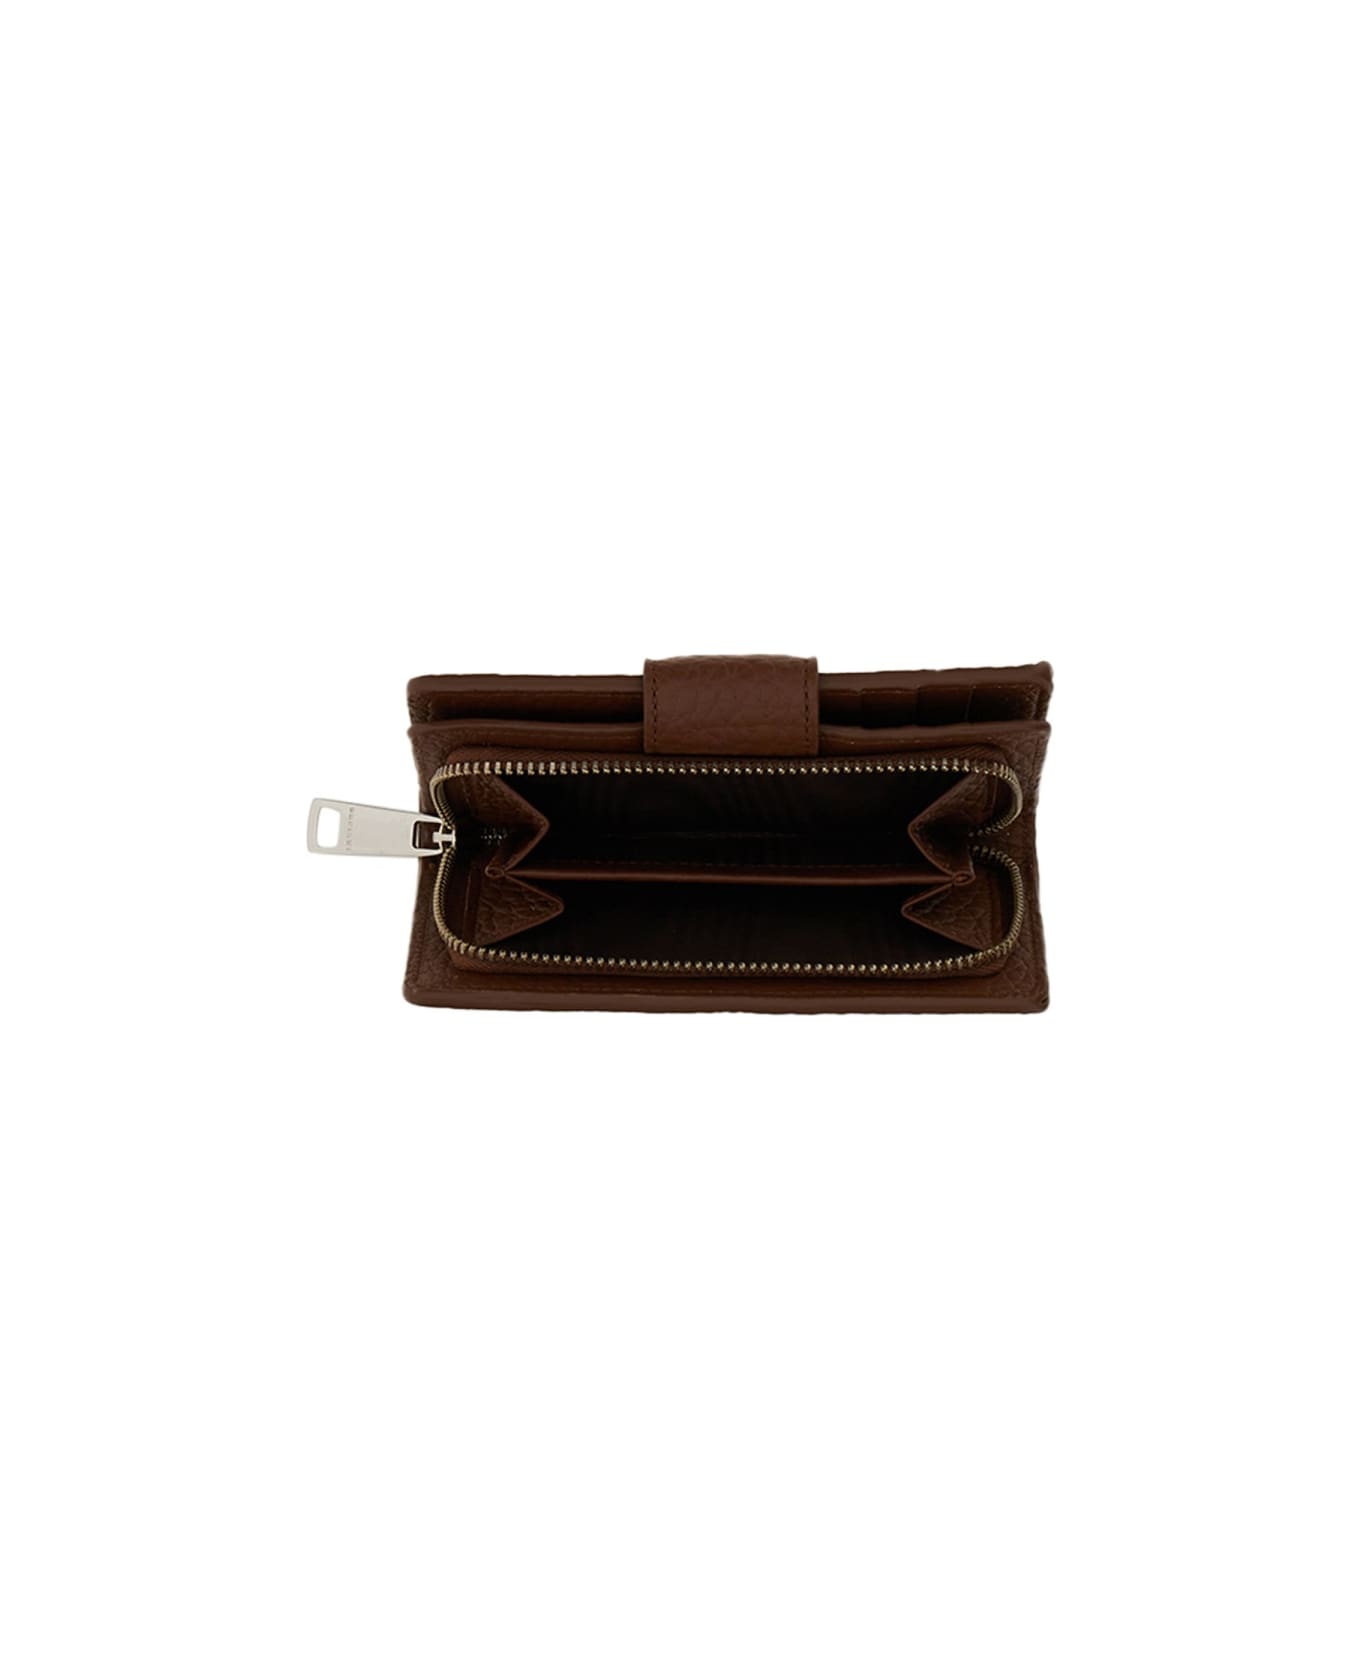 Orciani Soft Wallet - BROWN 財布